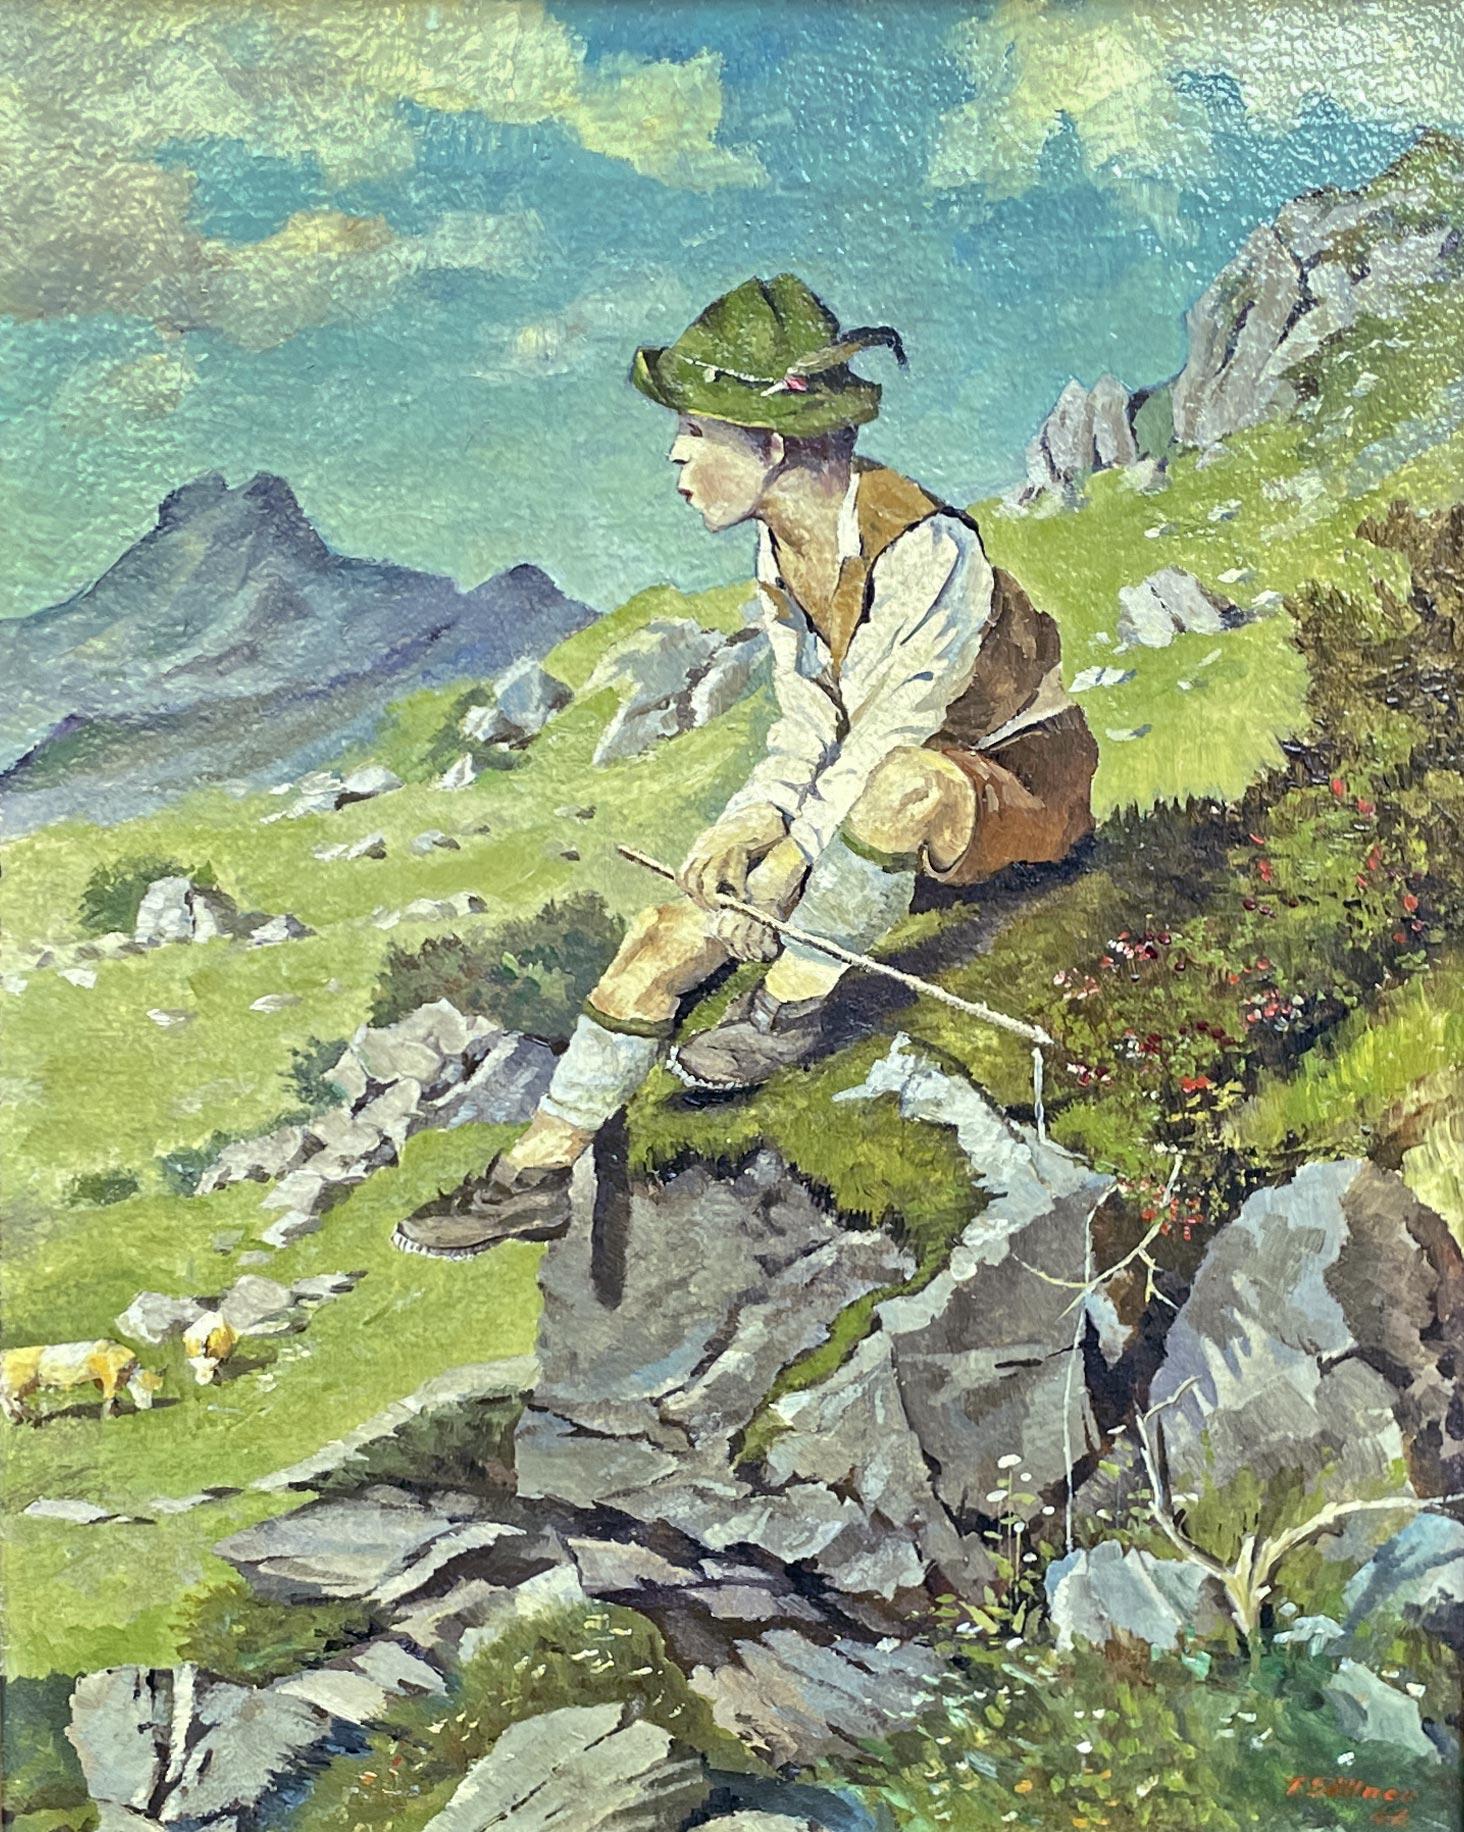 Fritz Sollner – Shepherd
SKU: QR06
cm40 x cm30 without frame
cm52 x cm42 with frame
oil on canvas – 1947

It is a quiet summer day and a young shepherd, after having led the herds to the highest pastures, is resting, sitting on a rock.
The flowers